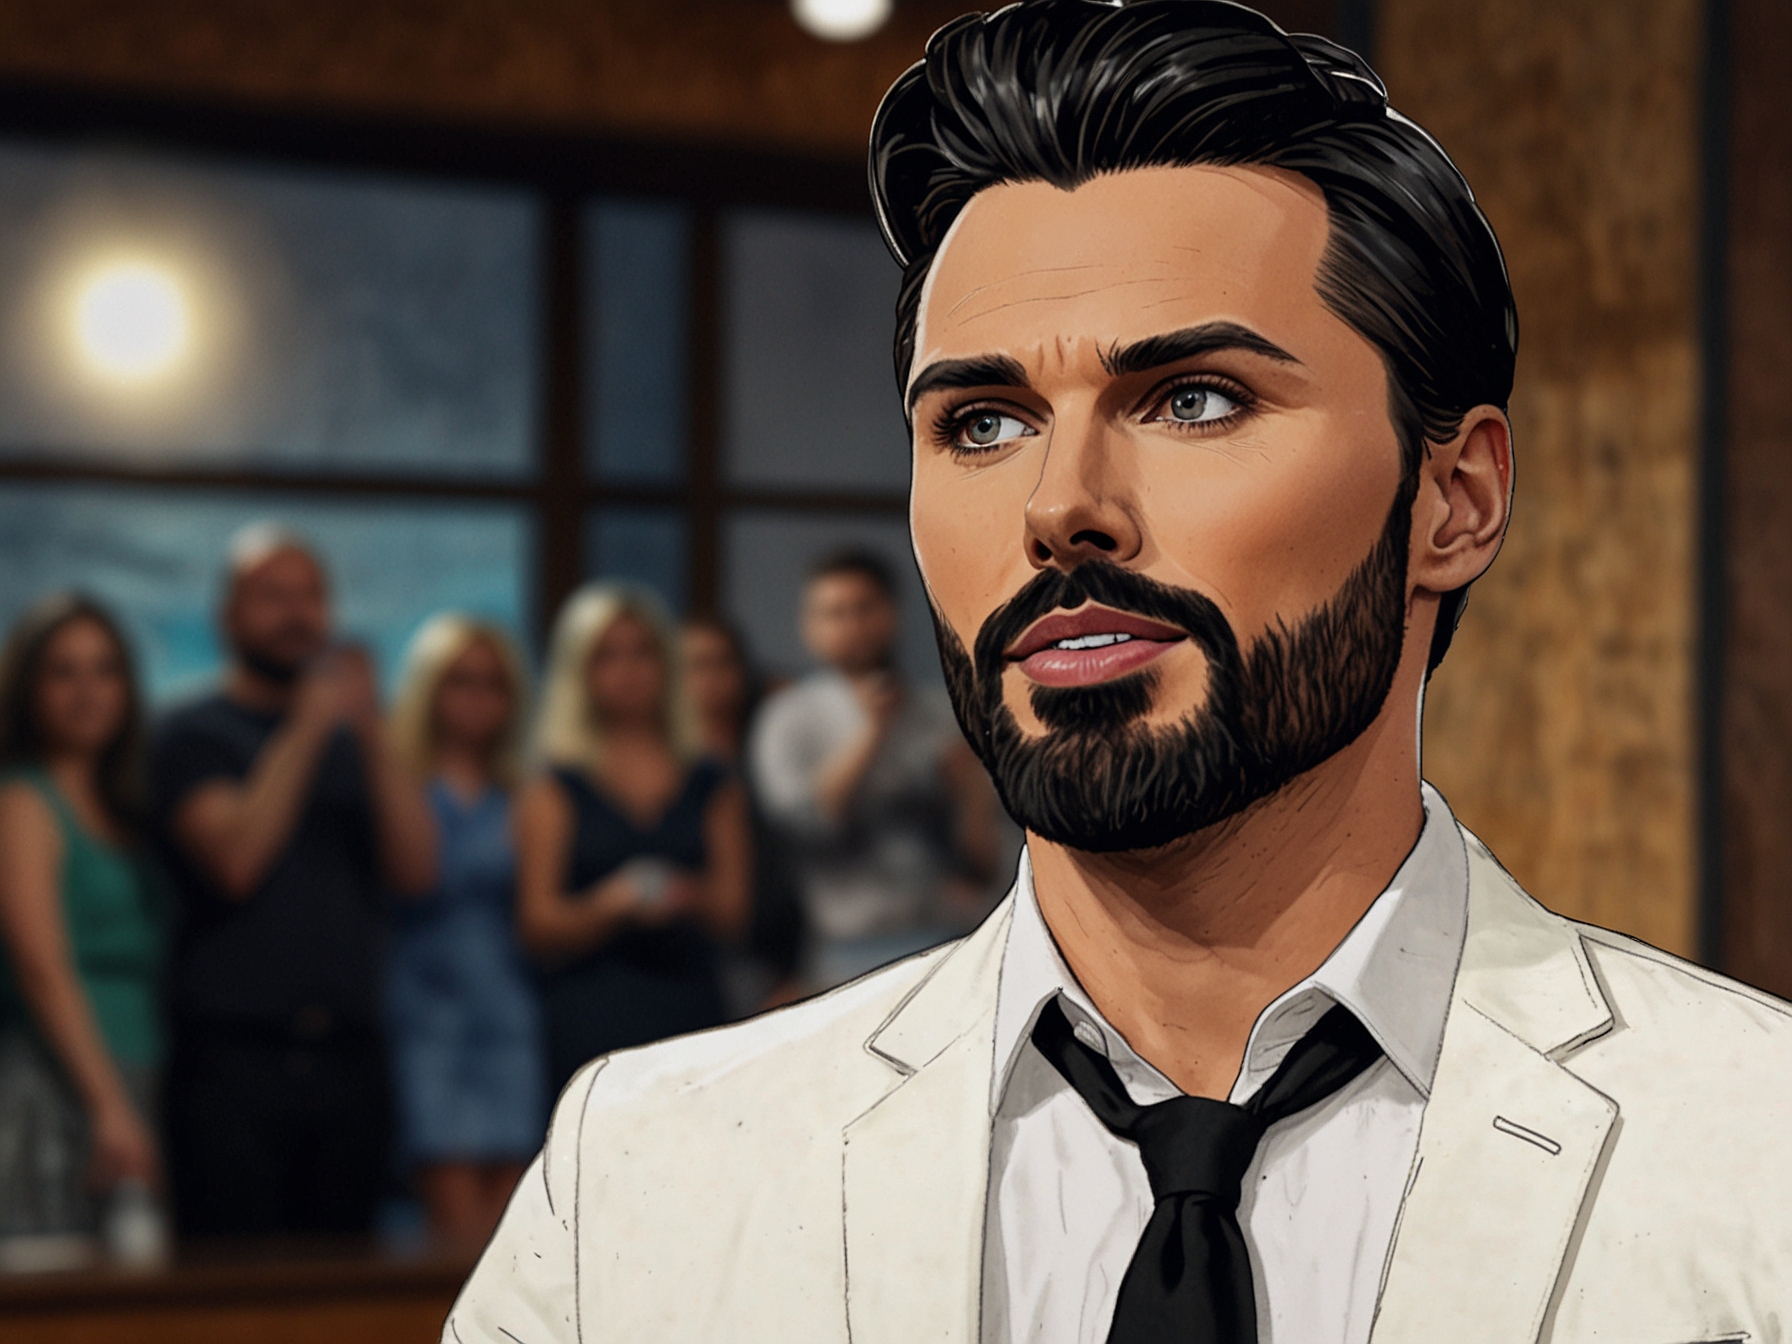 Rylan Clark during a television appearance, highlighting his public persona before discussing the severe impact of his mental health breakdown.